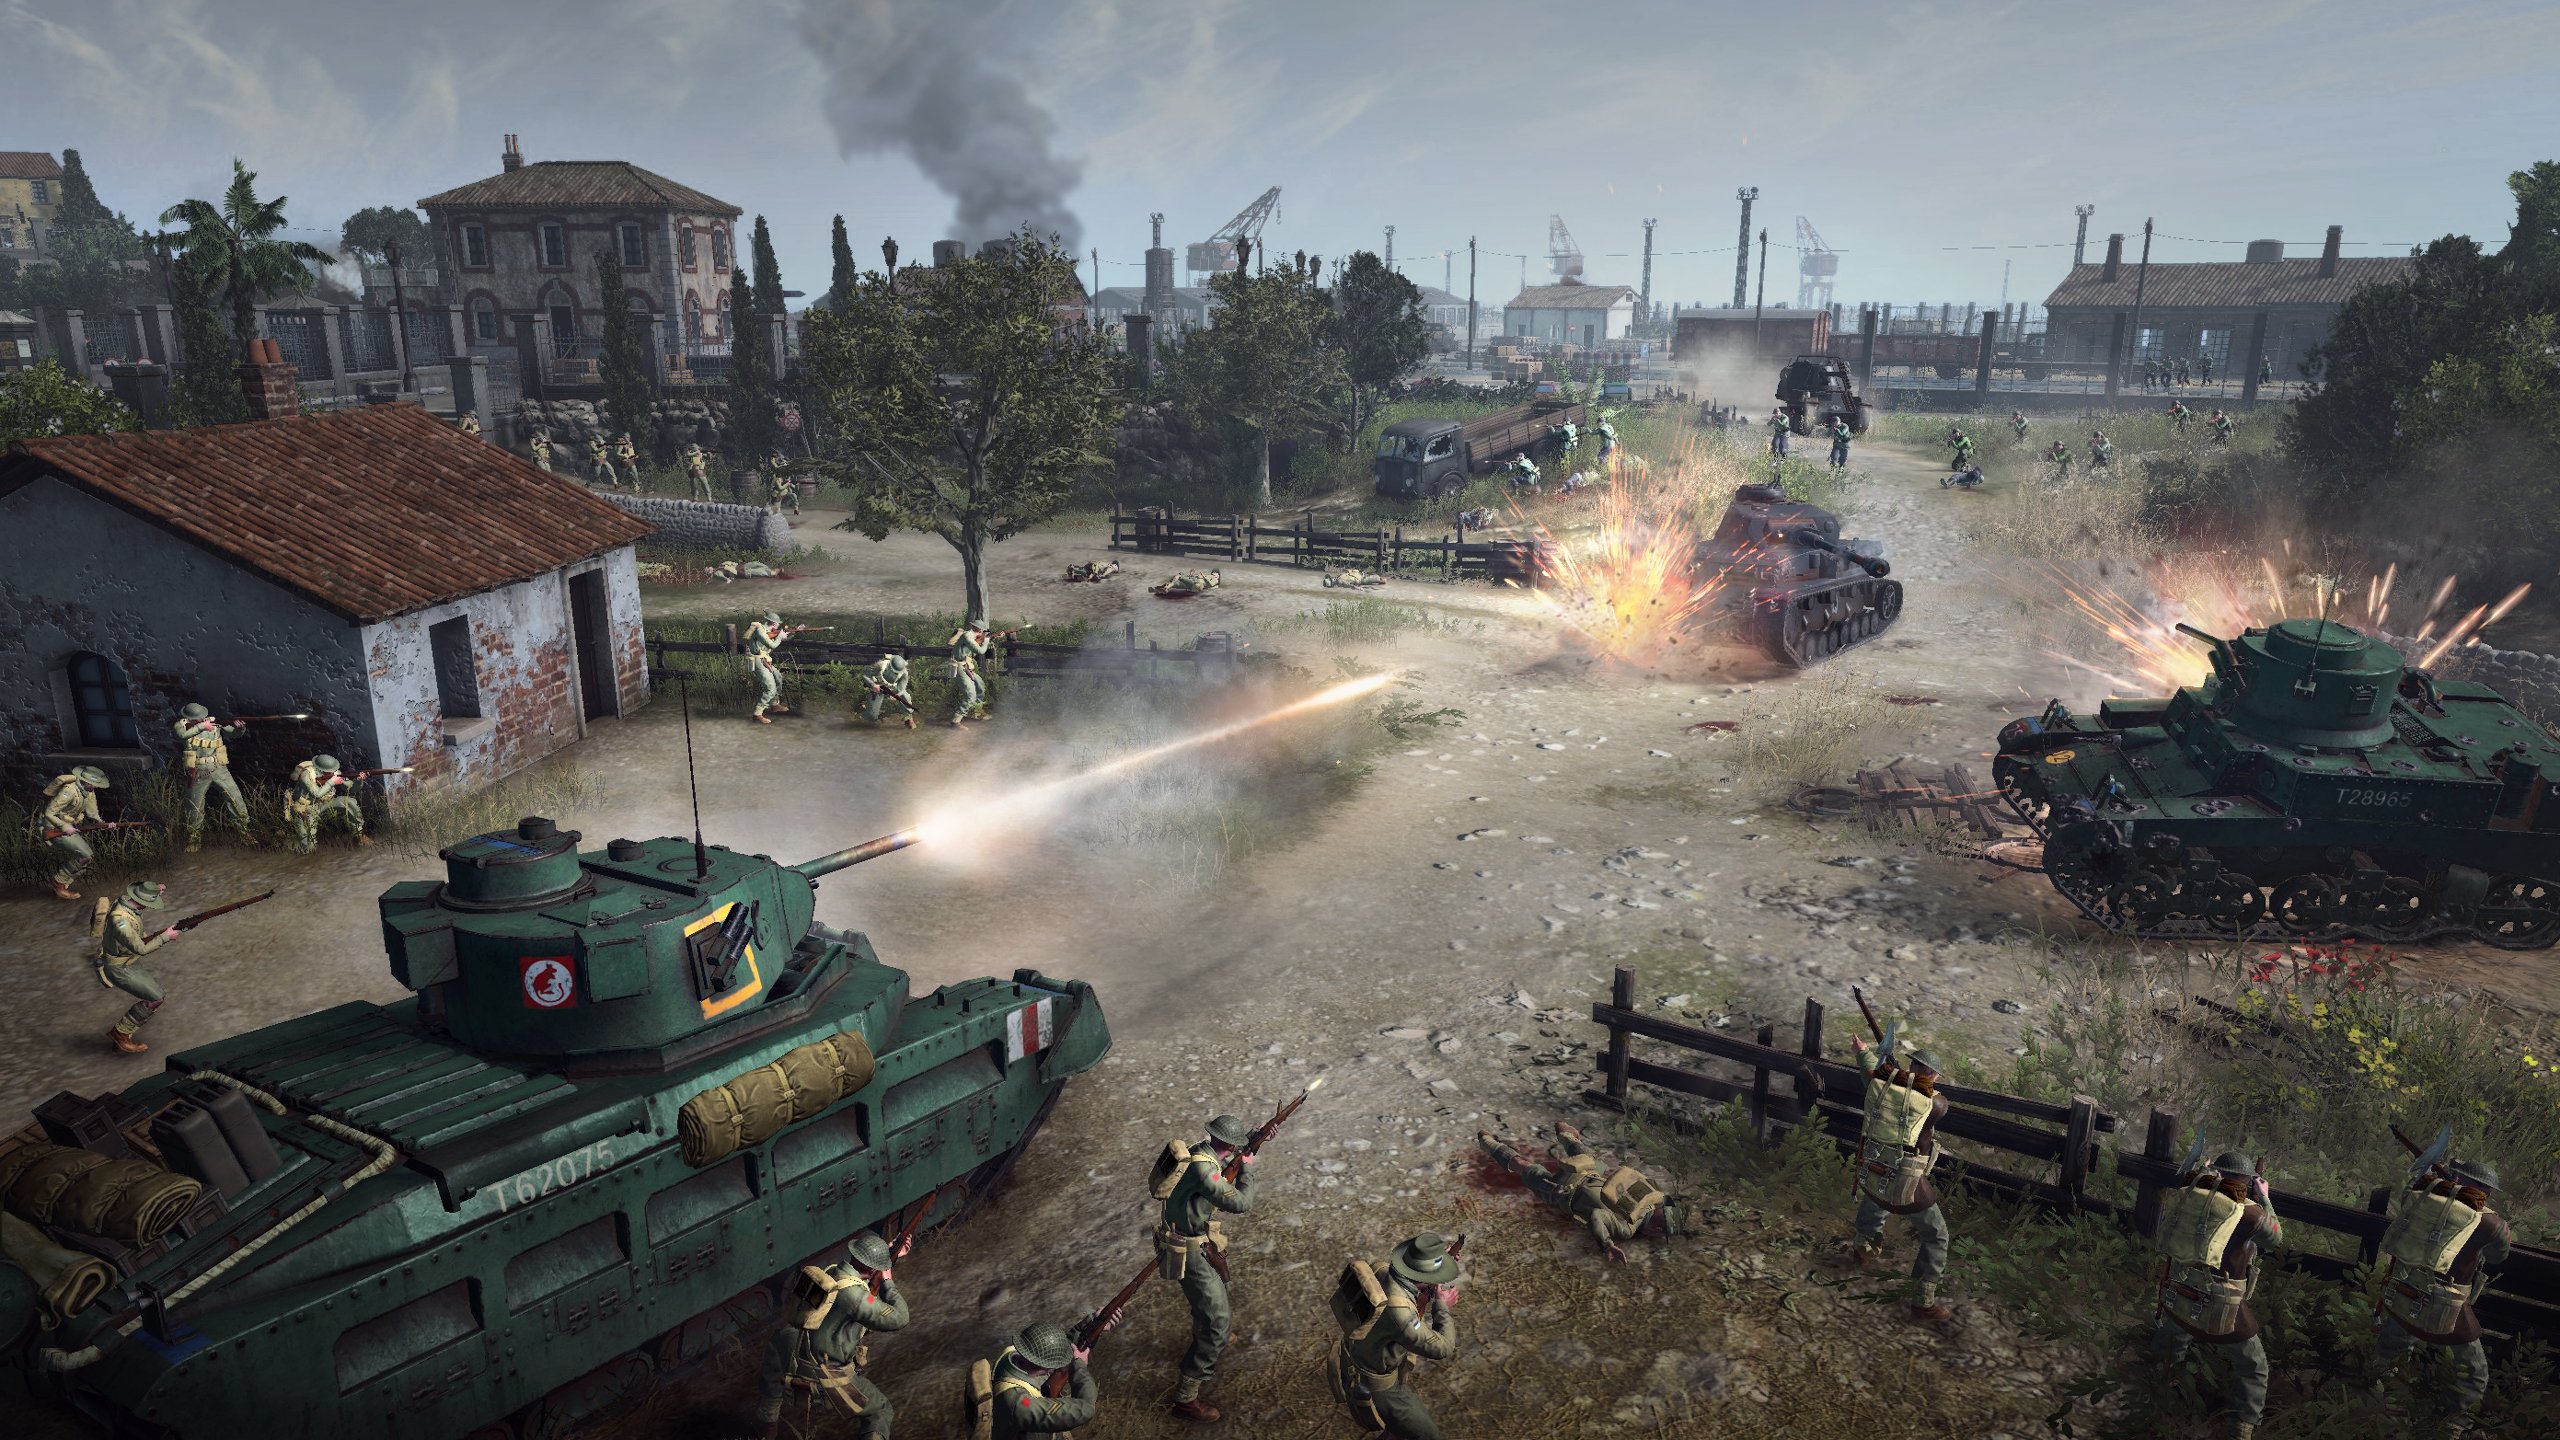 Company of Heroes 3 Single Player (Campaign) Review